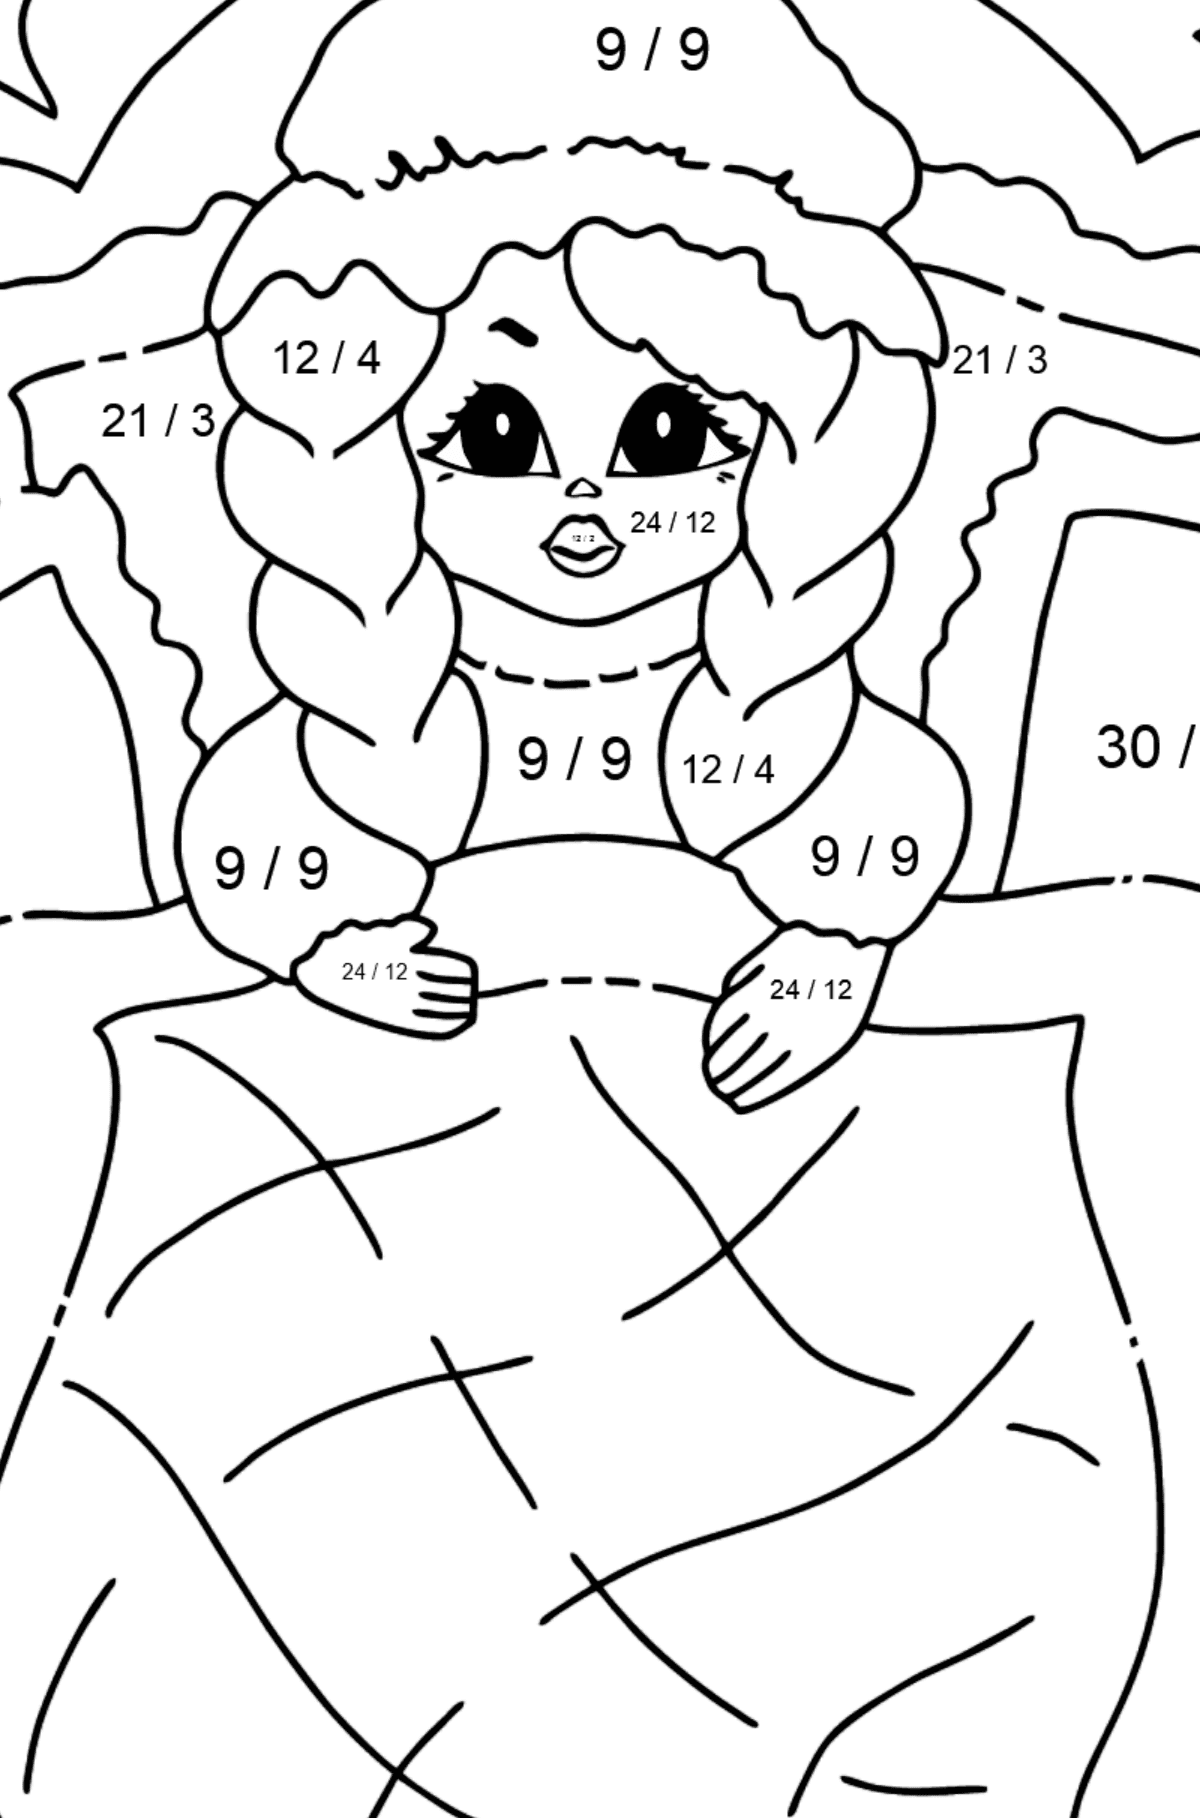 Coloring Picture - A Princess in Bed - Math Coloring - Division for Kids